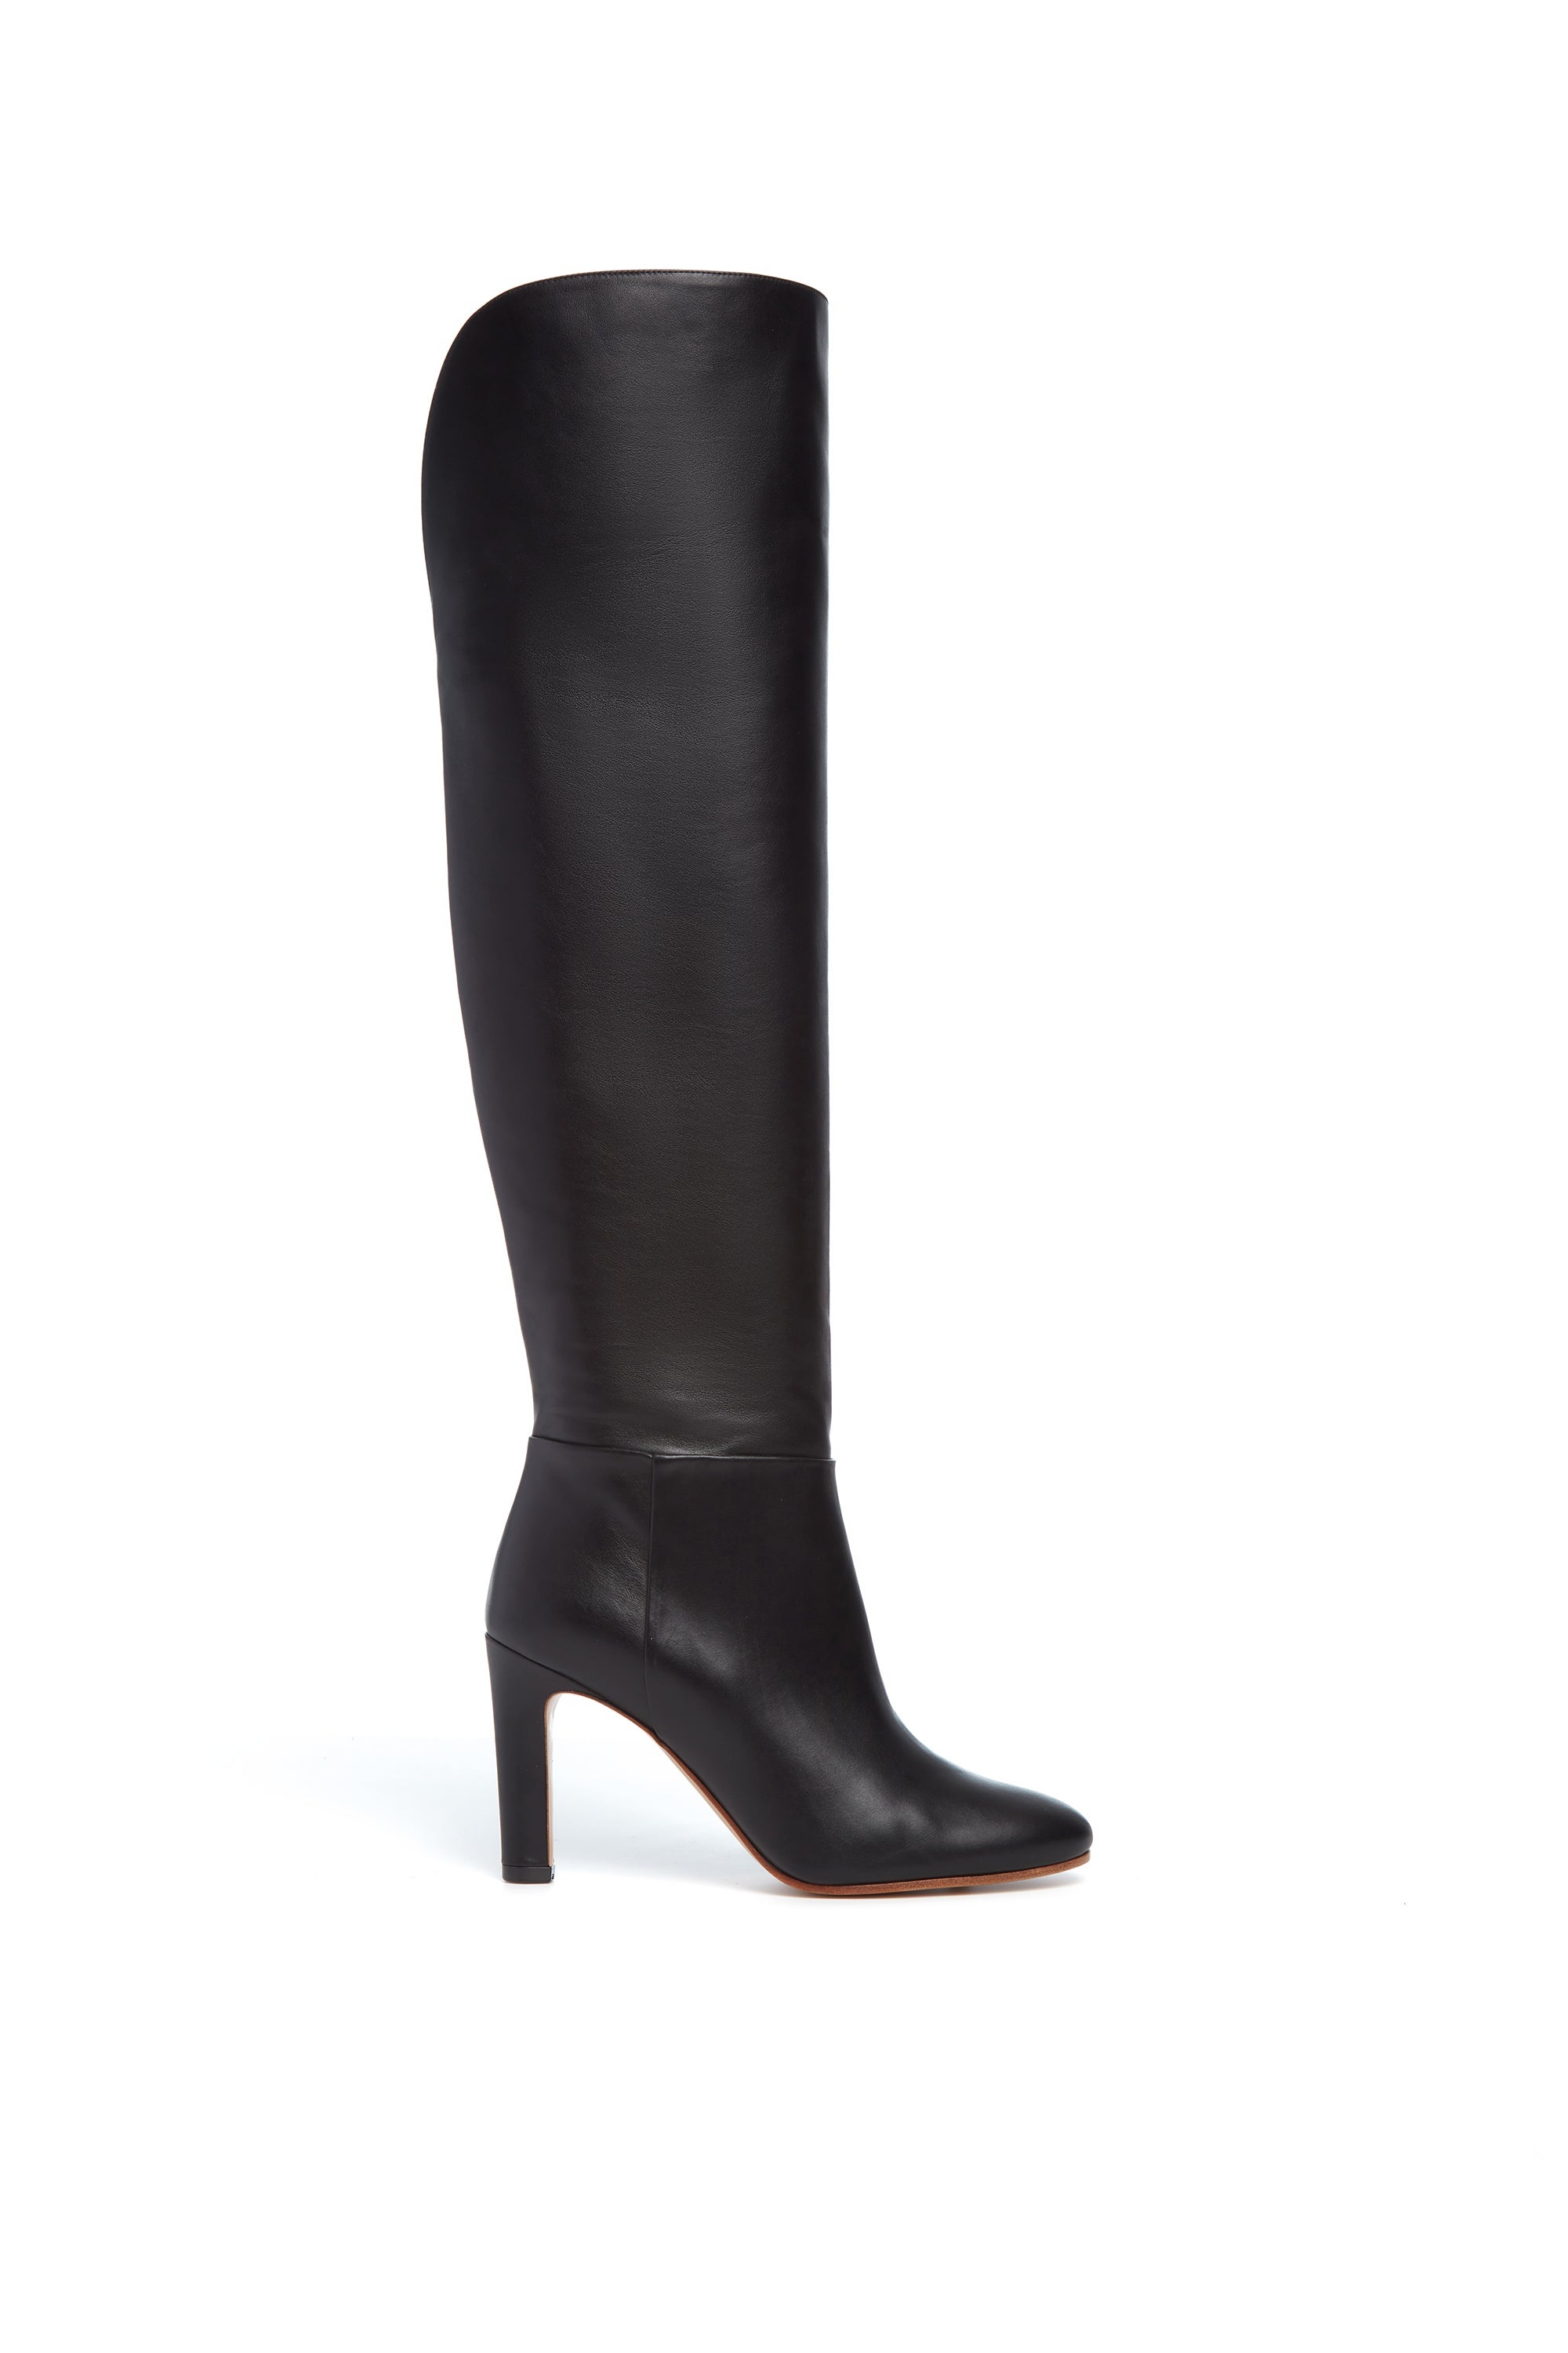 Linda Over-the-Knee Boot in Black Leather - 1